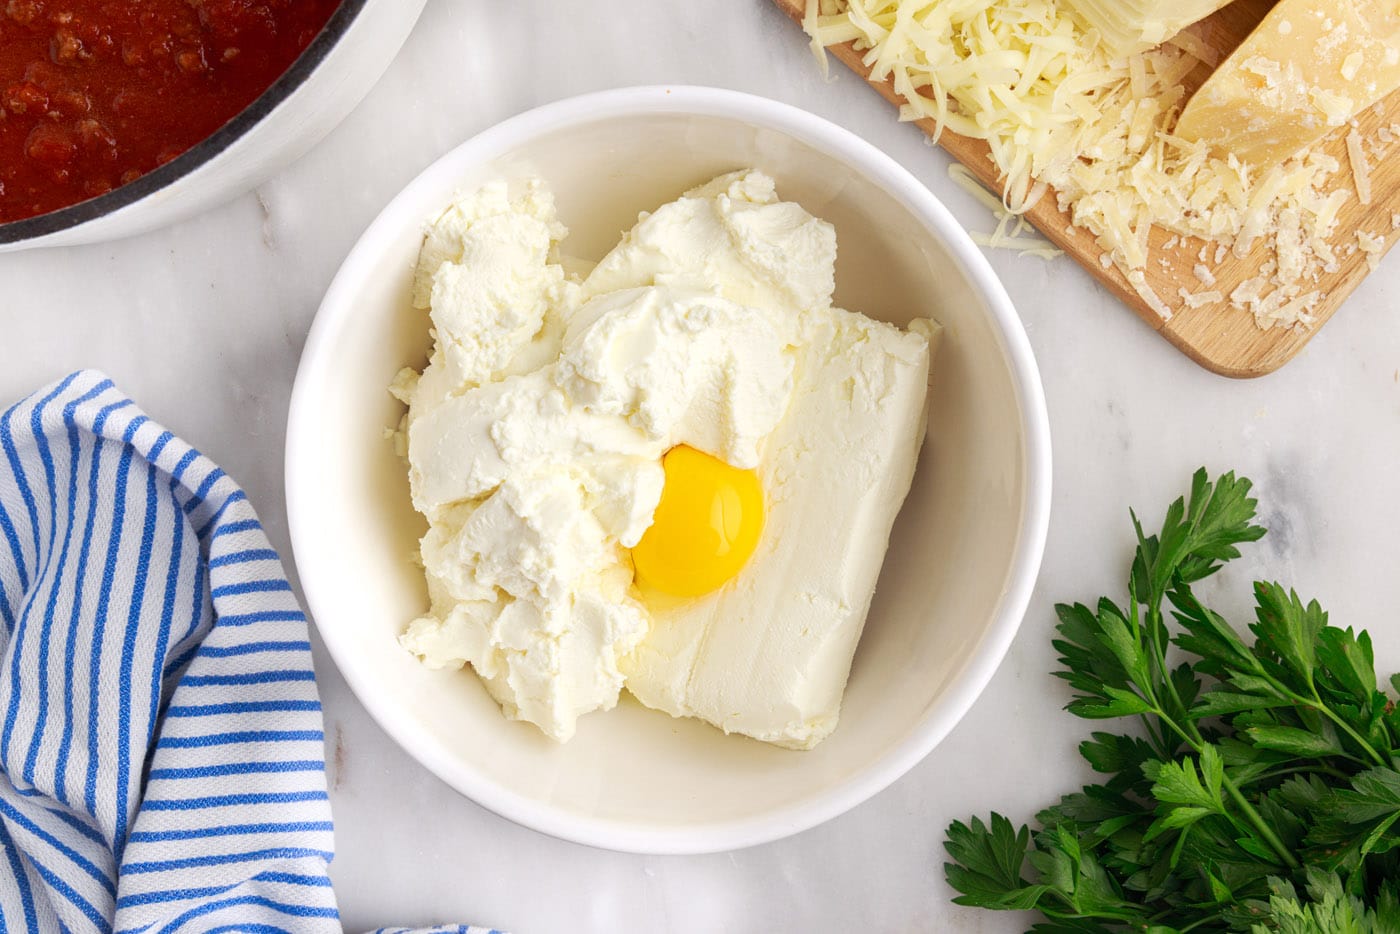 cream cheese, egg, and ricotta in a bowl